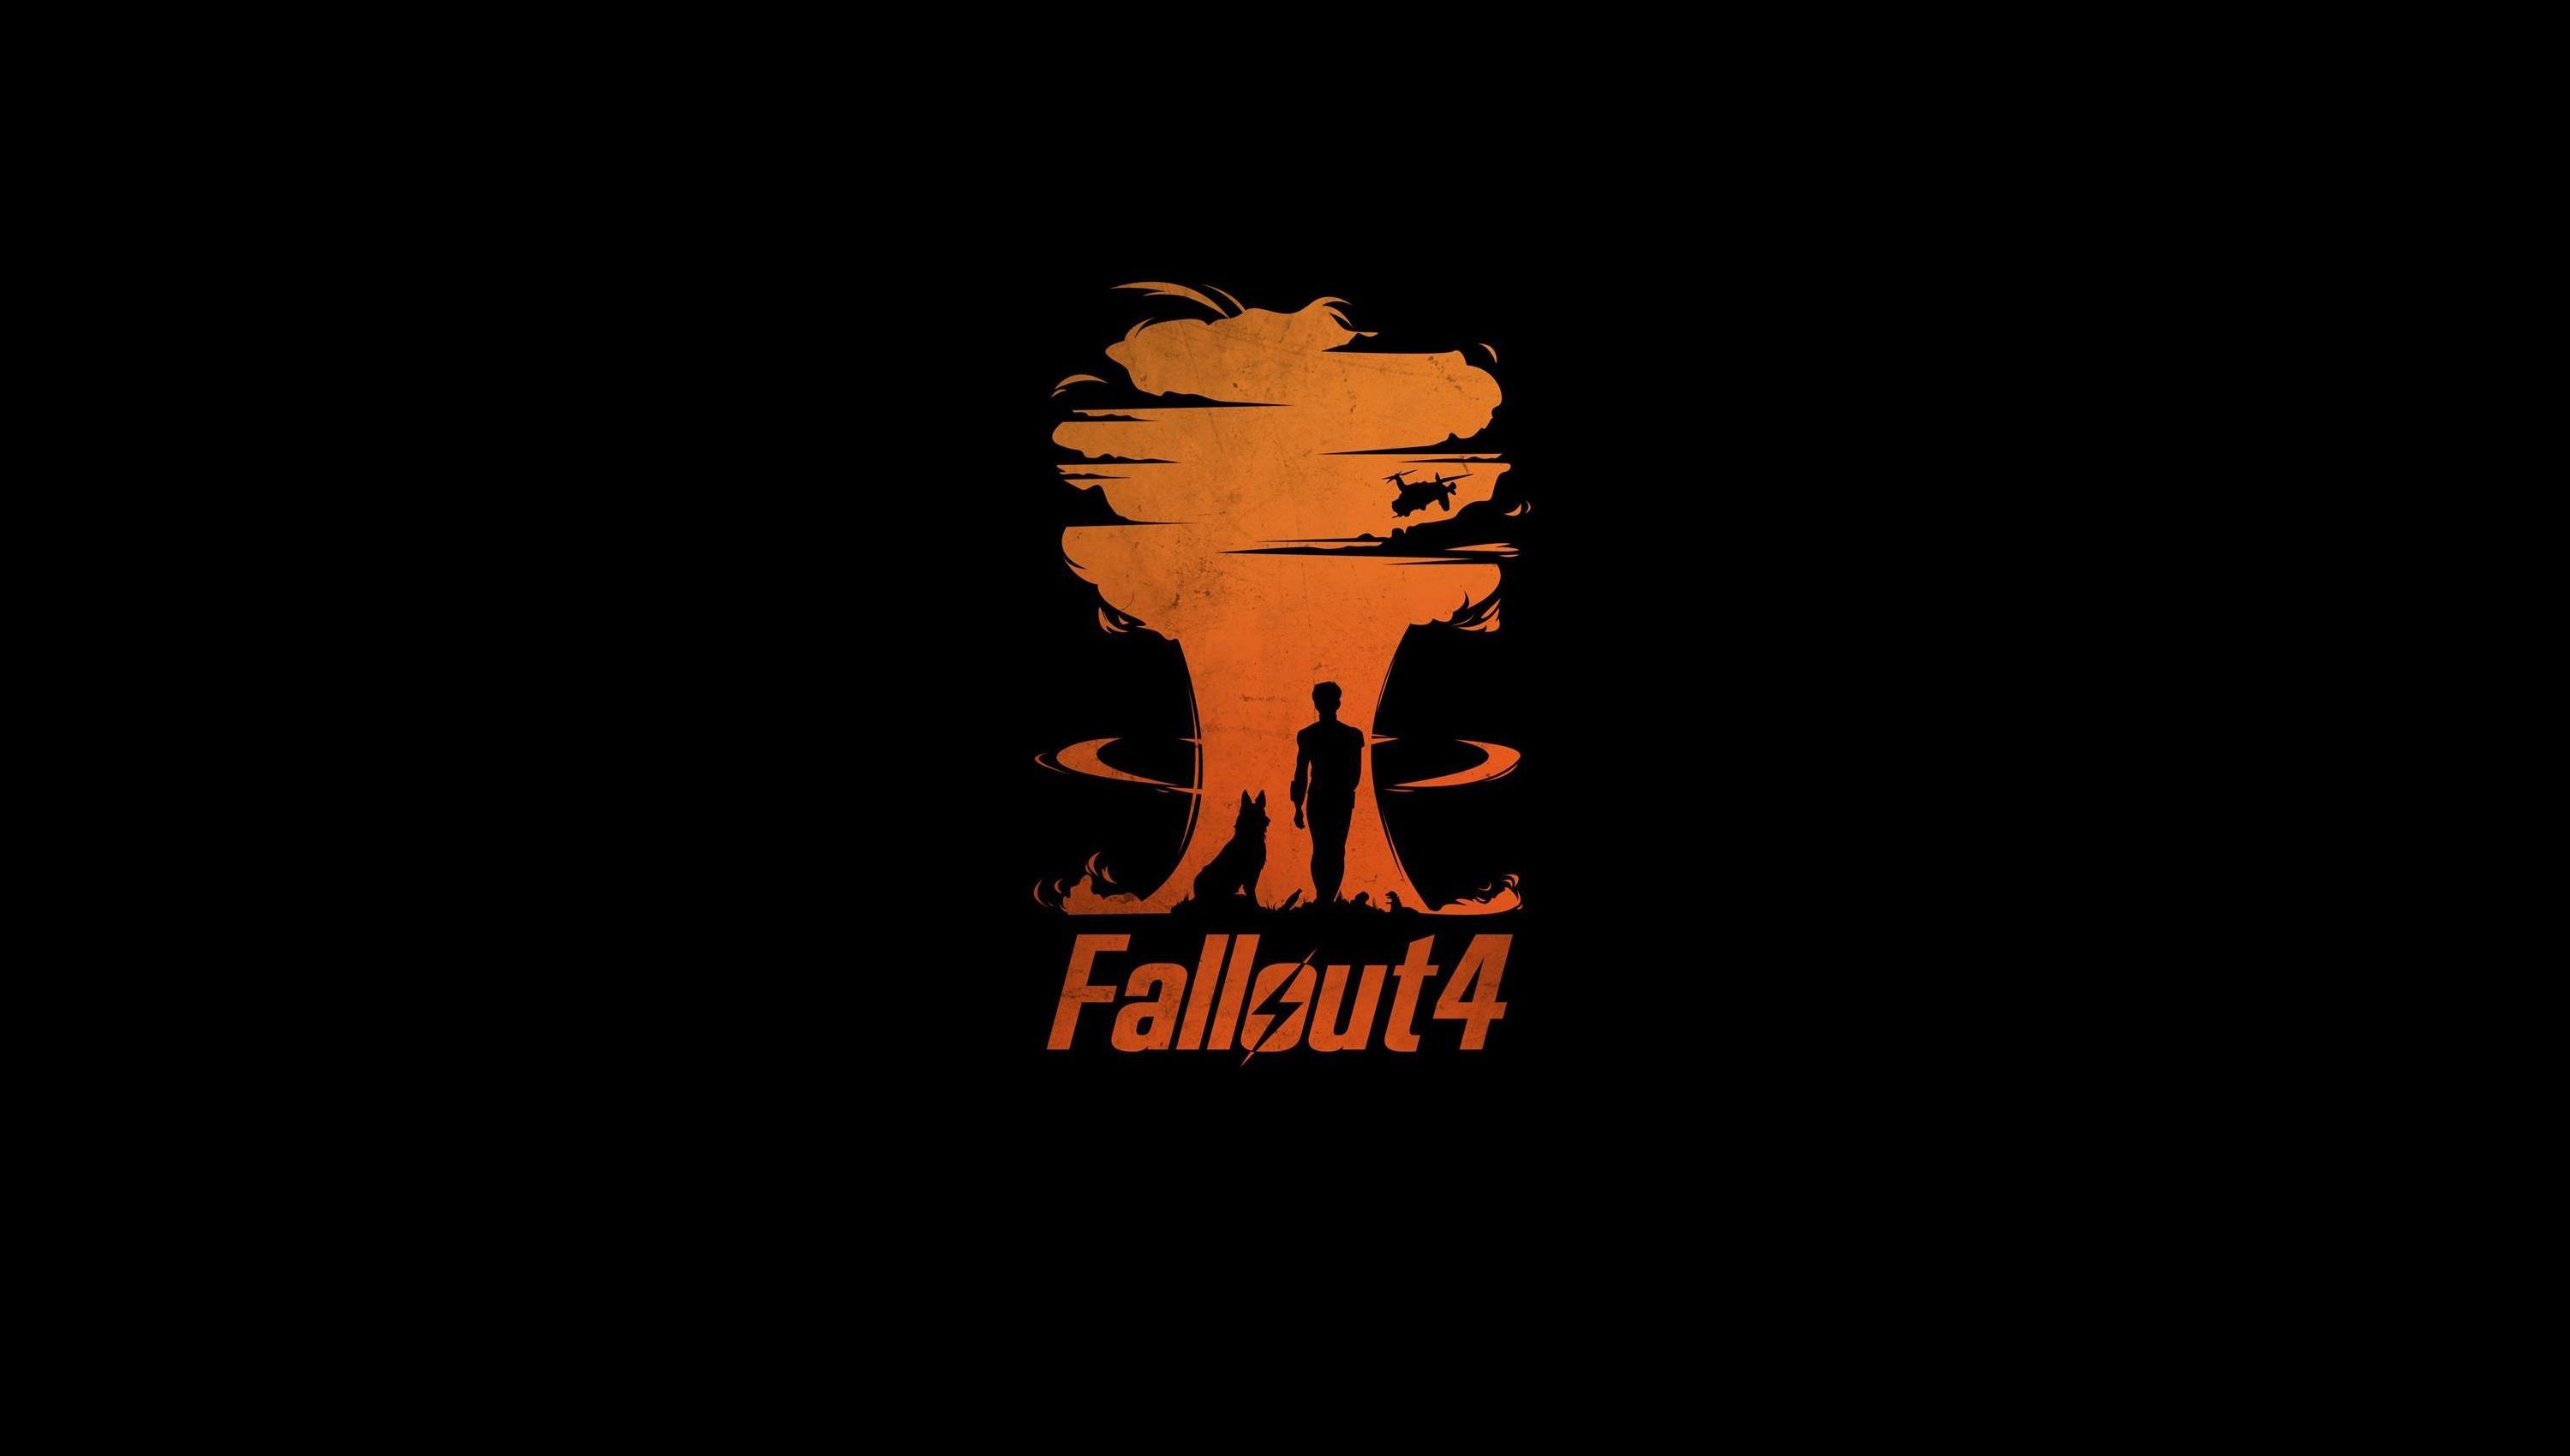 Video Games Fallout Fallout 4 Bethesda Softworks Dogmeat 3000x1700